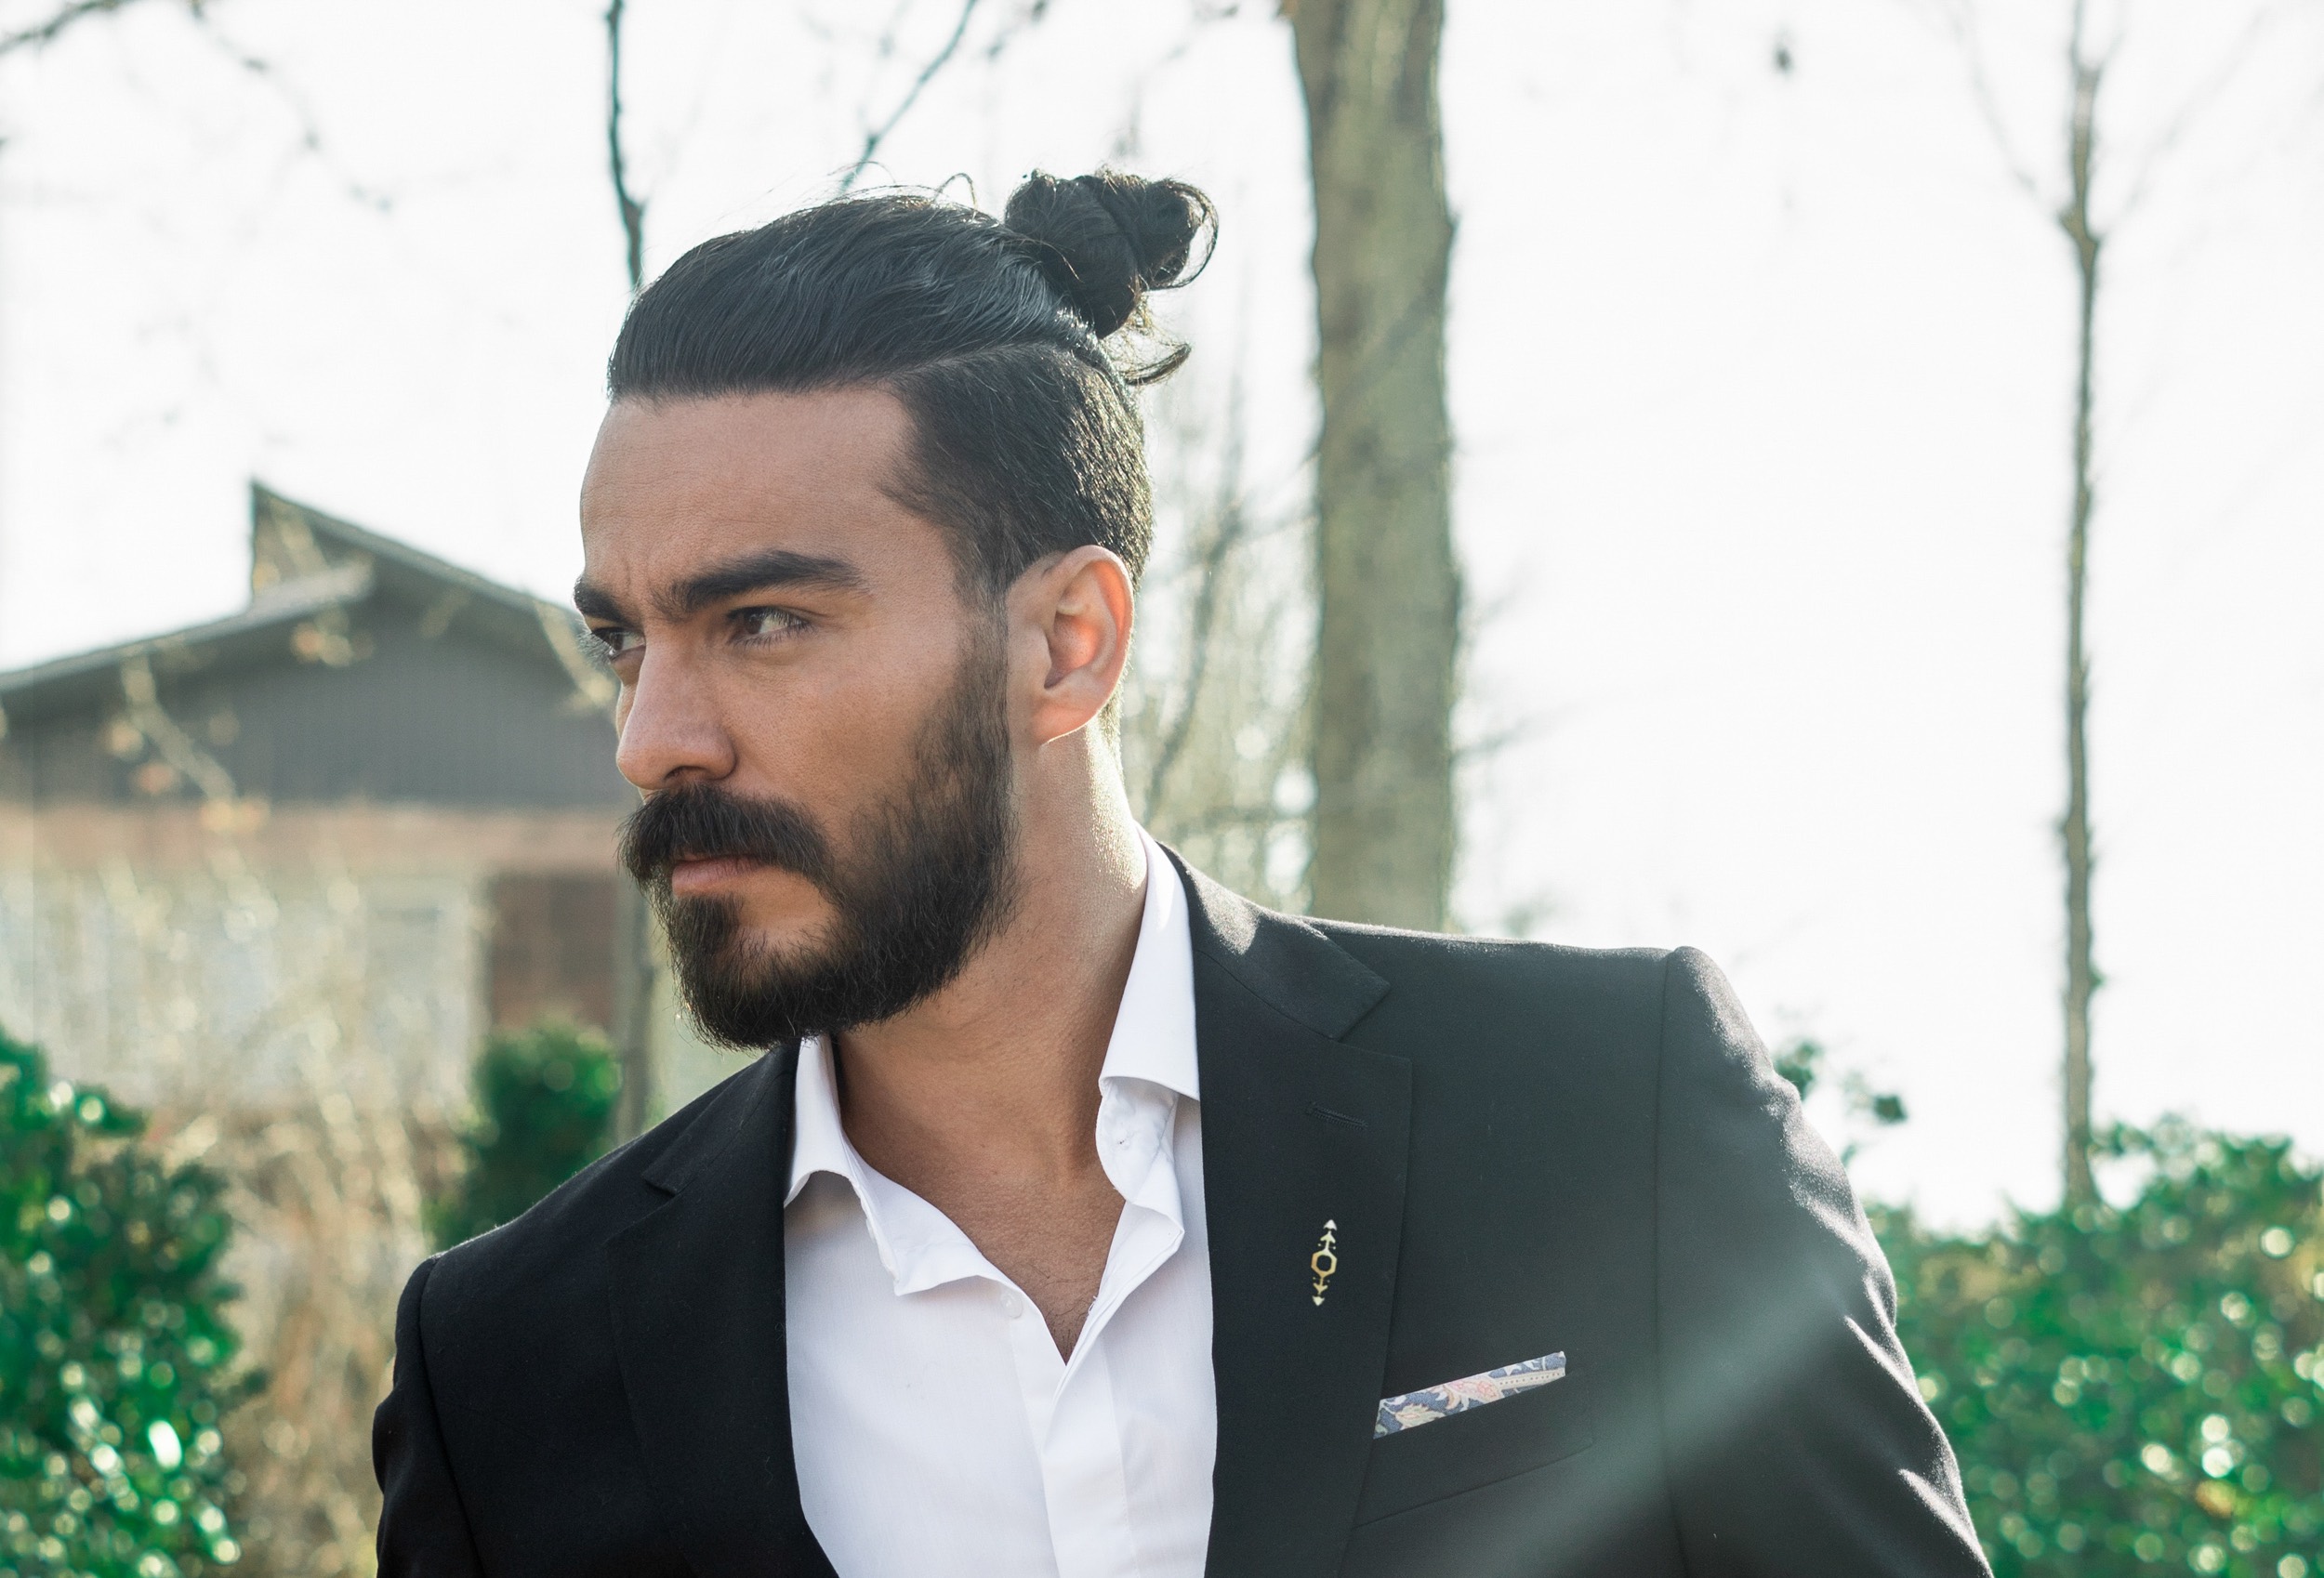 Classic men's hairstyles - FashionFests